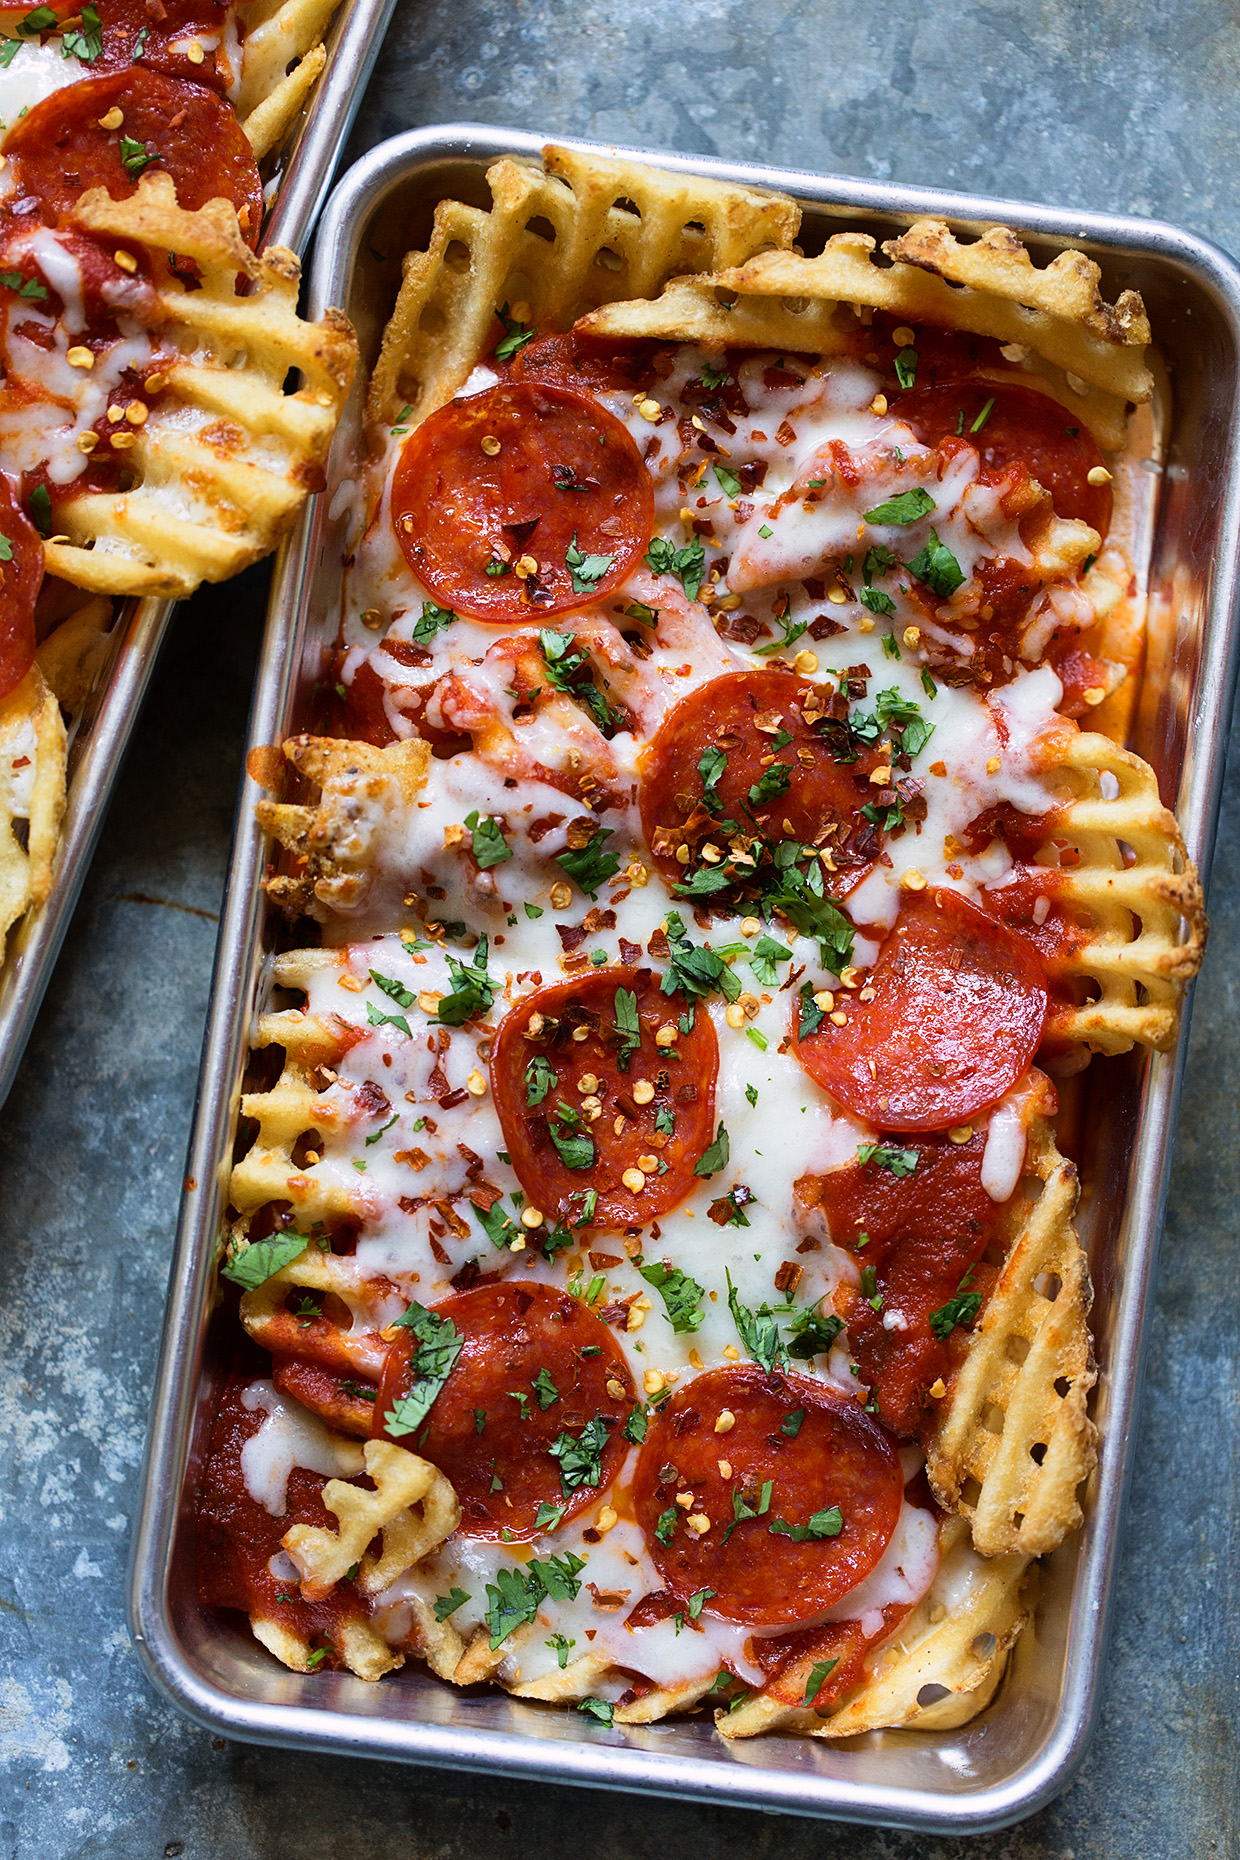 https://realfoodbydad.com/wp-content/uploads/2016/10/Waffled-Pizza-Fries-Real-Food-by-Dad.jpg